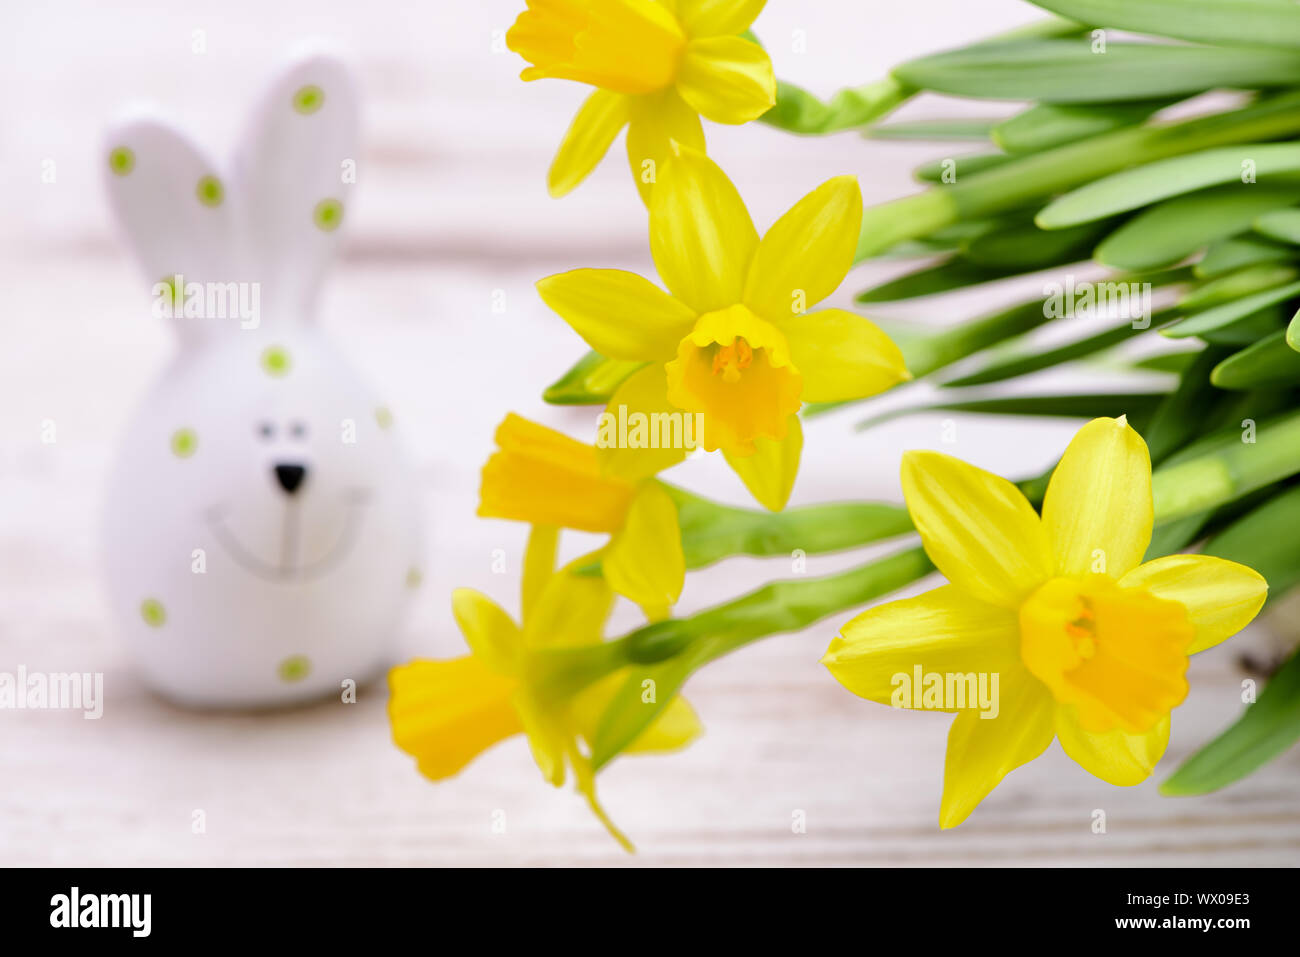 bunch of colorful tulips Stock Photo